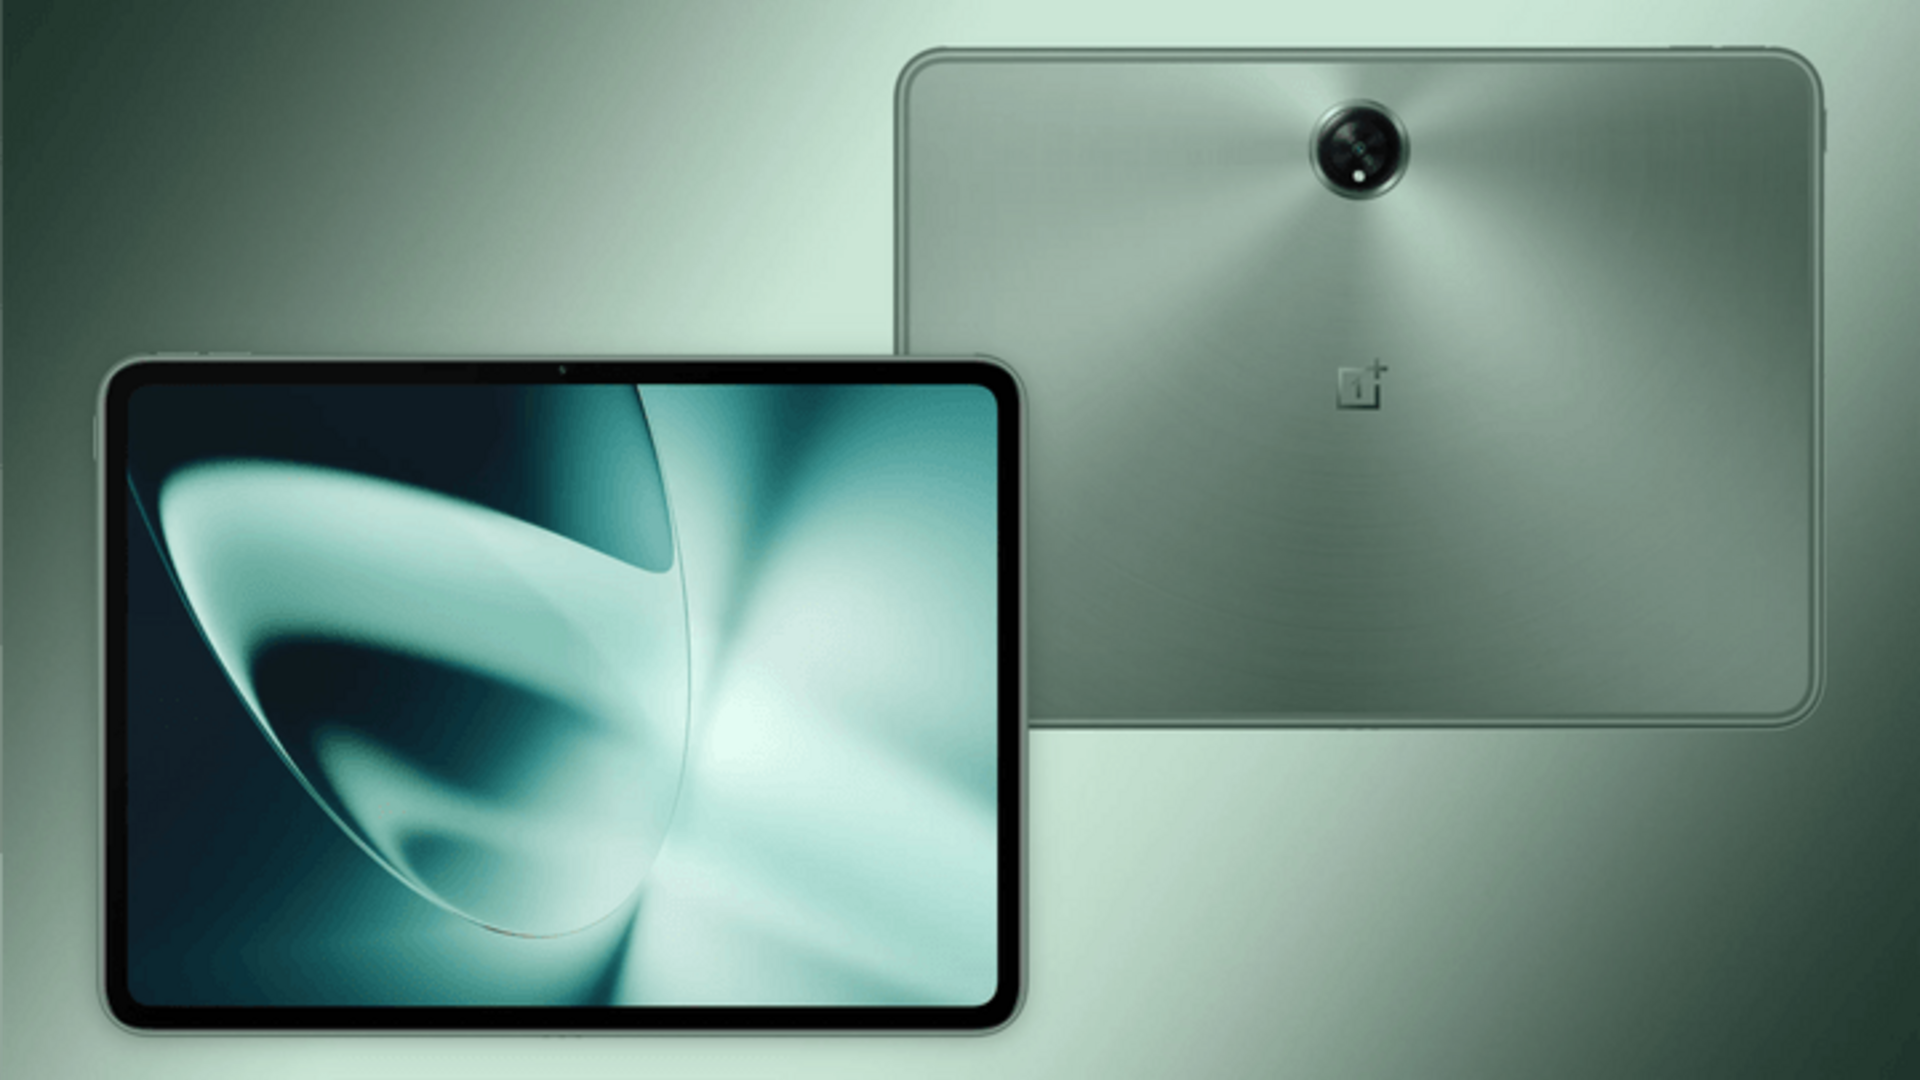 OnePlus reportedly working on new Android tablet: What we know